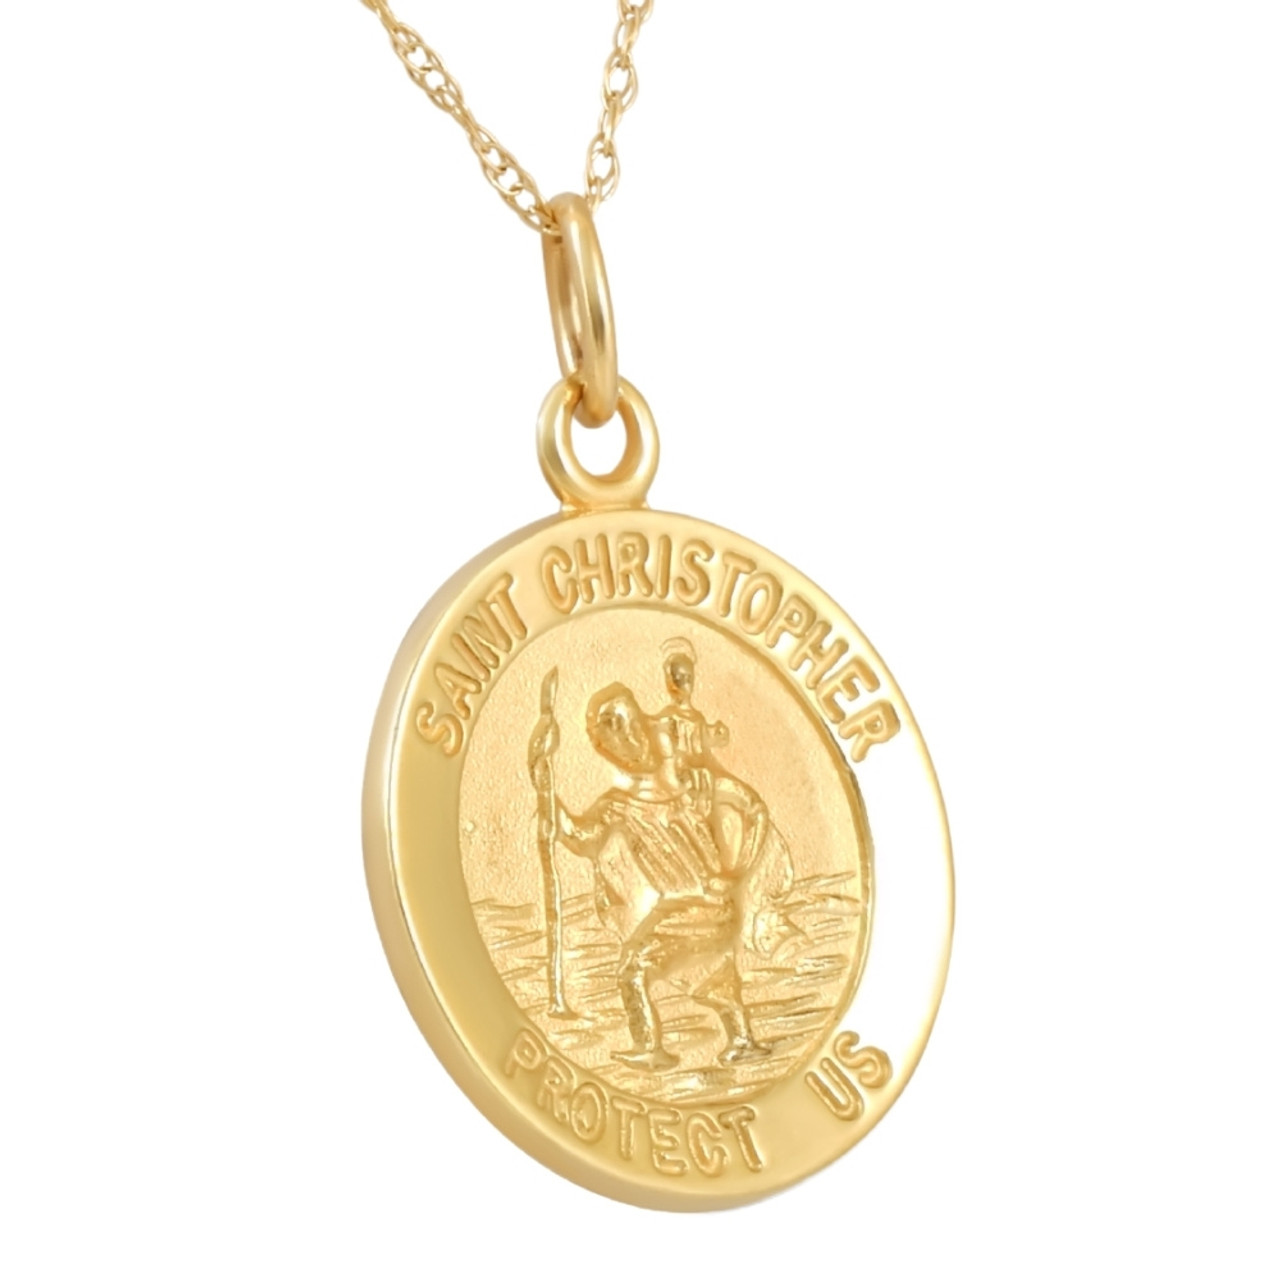 Gold Saint Christopher Medal - ST4. Free and Fast Worldwide Delivery